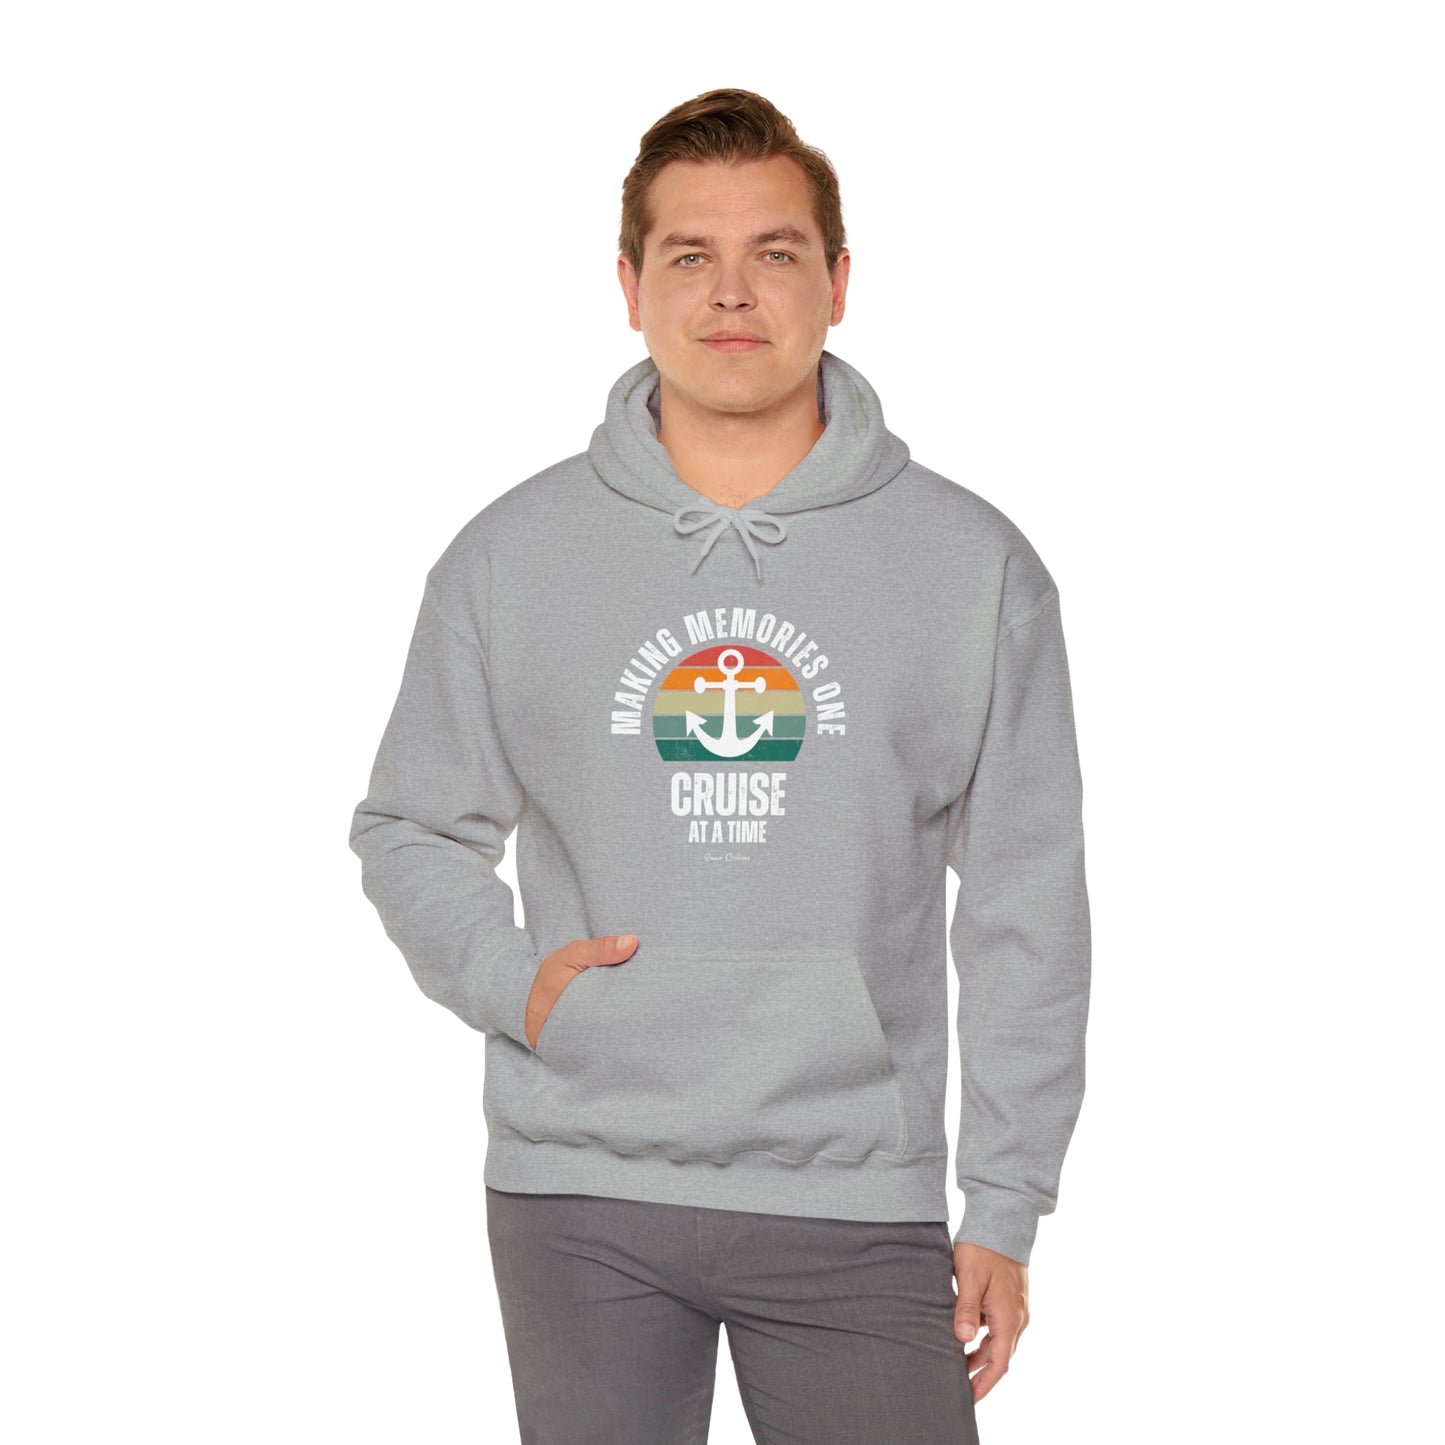 Making Memories One Cruise at a Time - UNISEX Hoodie